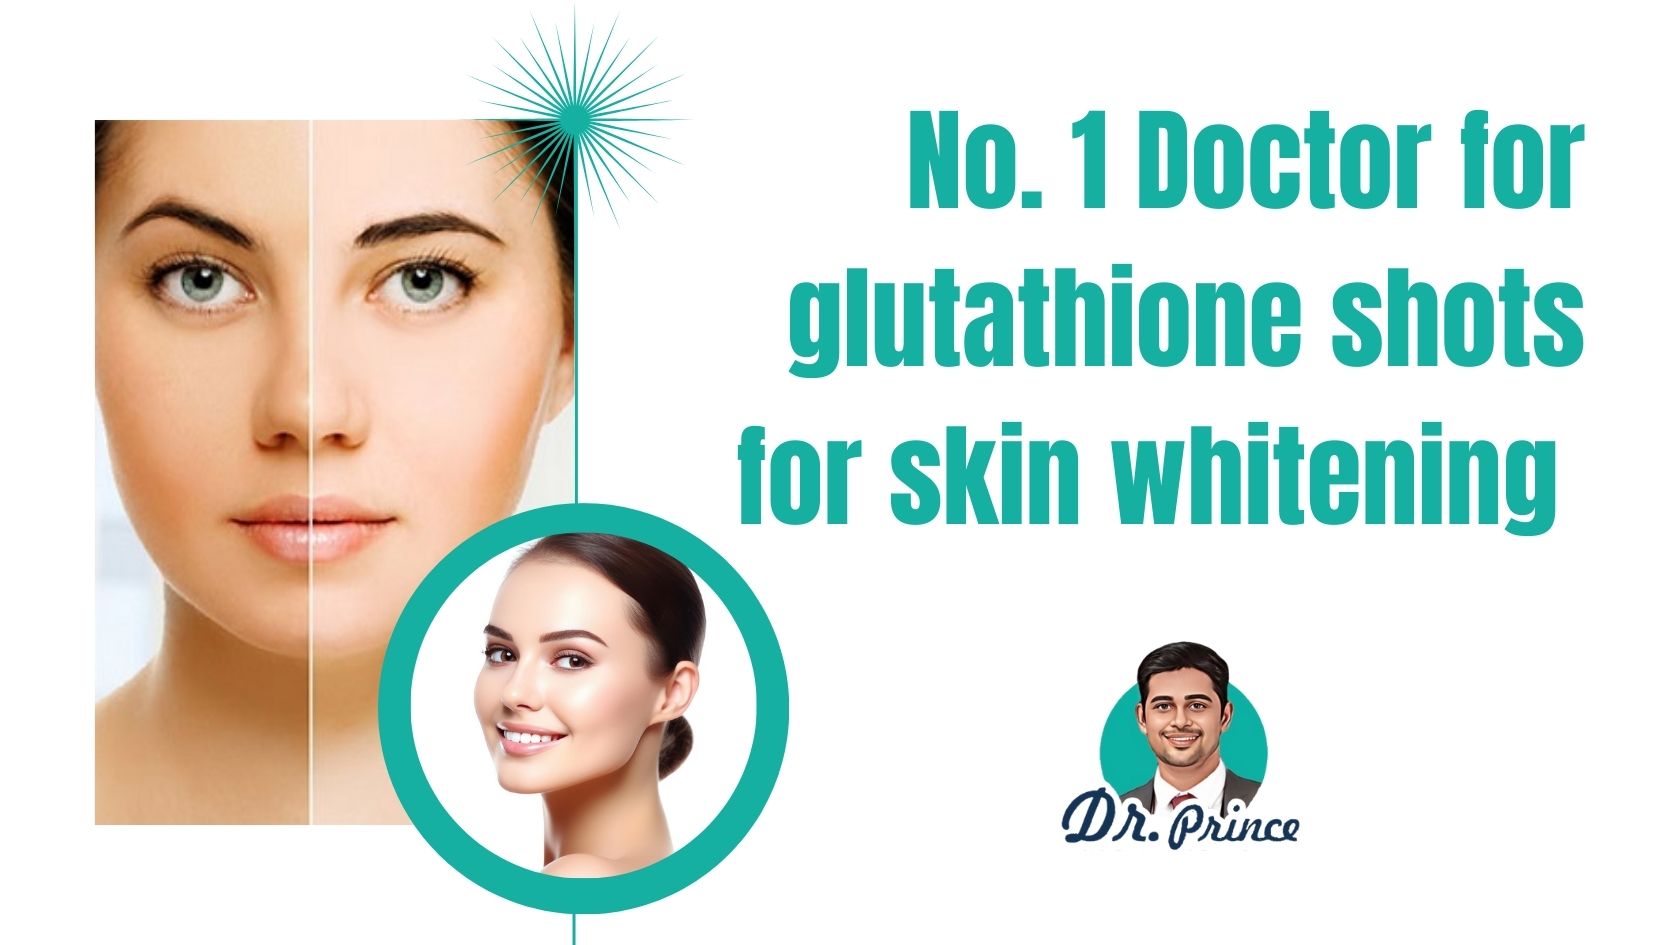 Dr. Prince administering a glutathione shot for skin whitening in Kerala